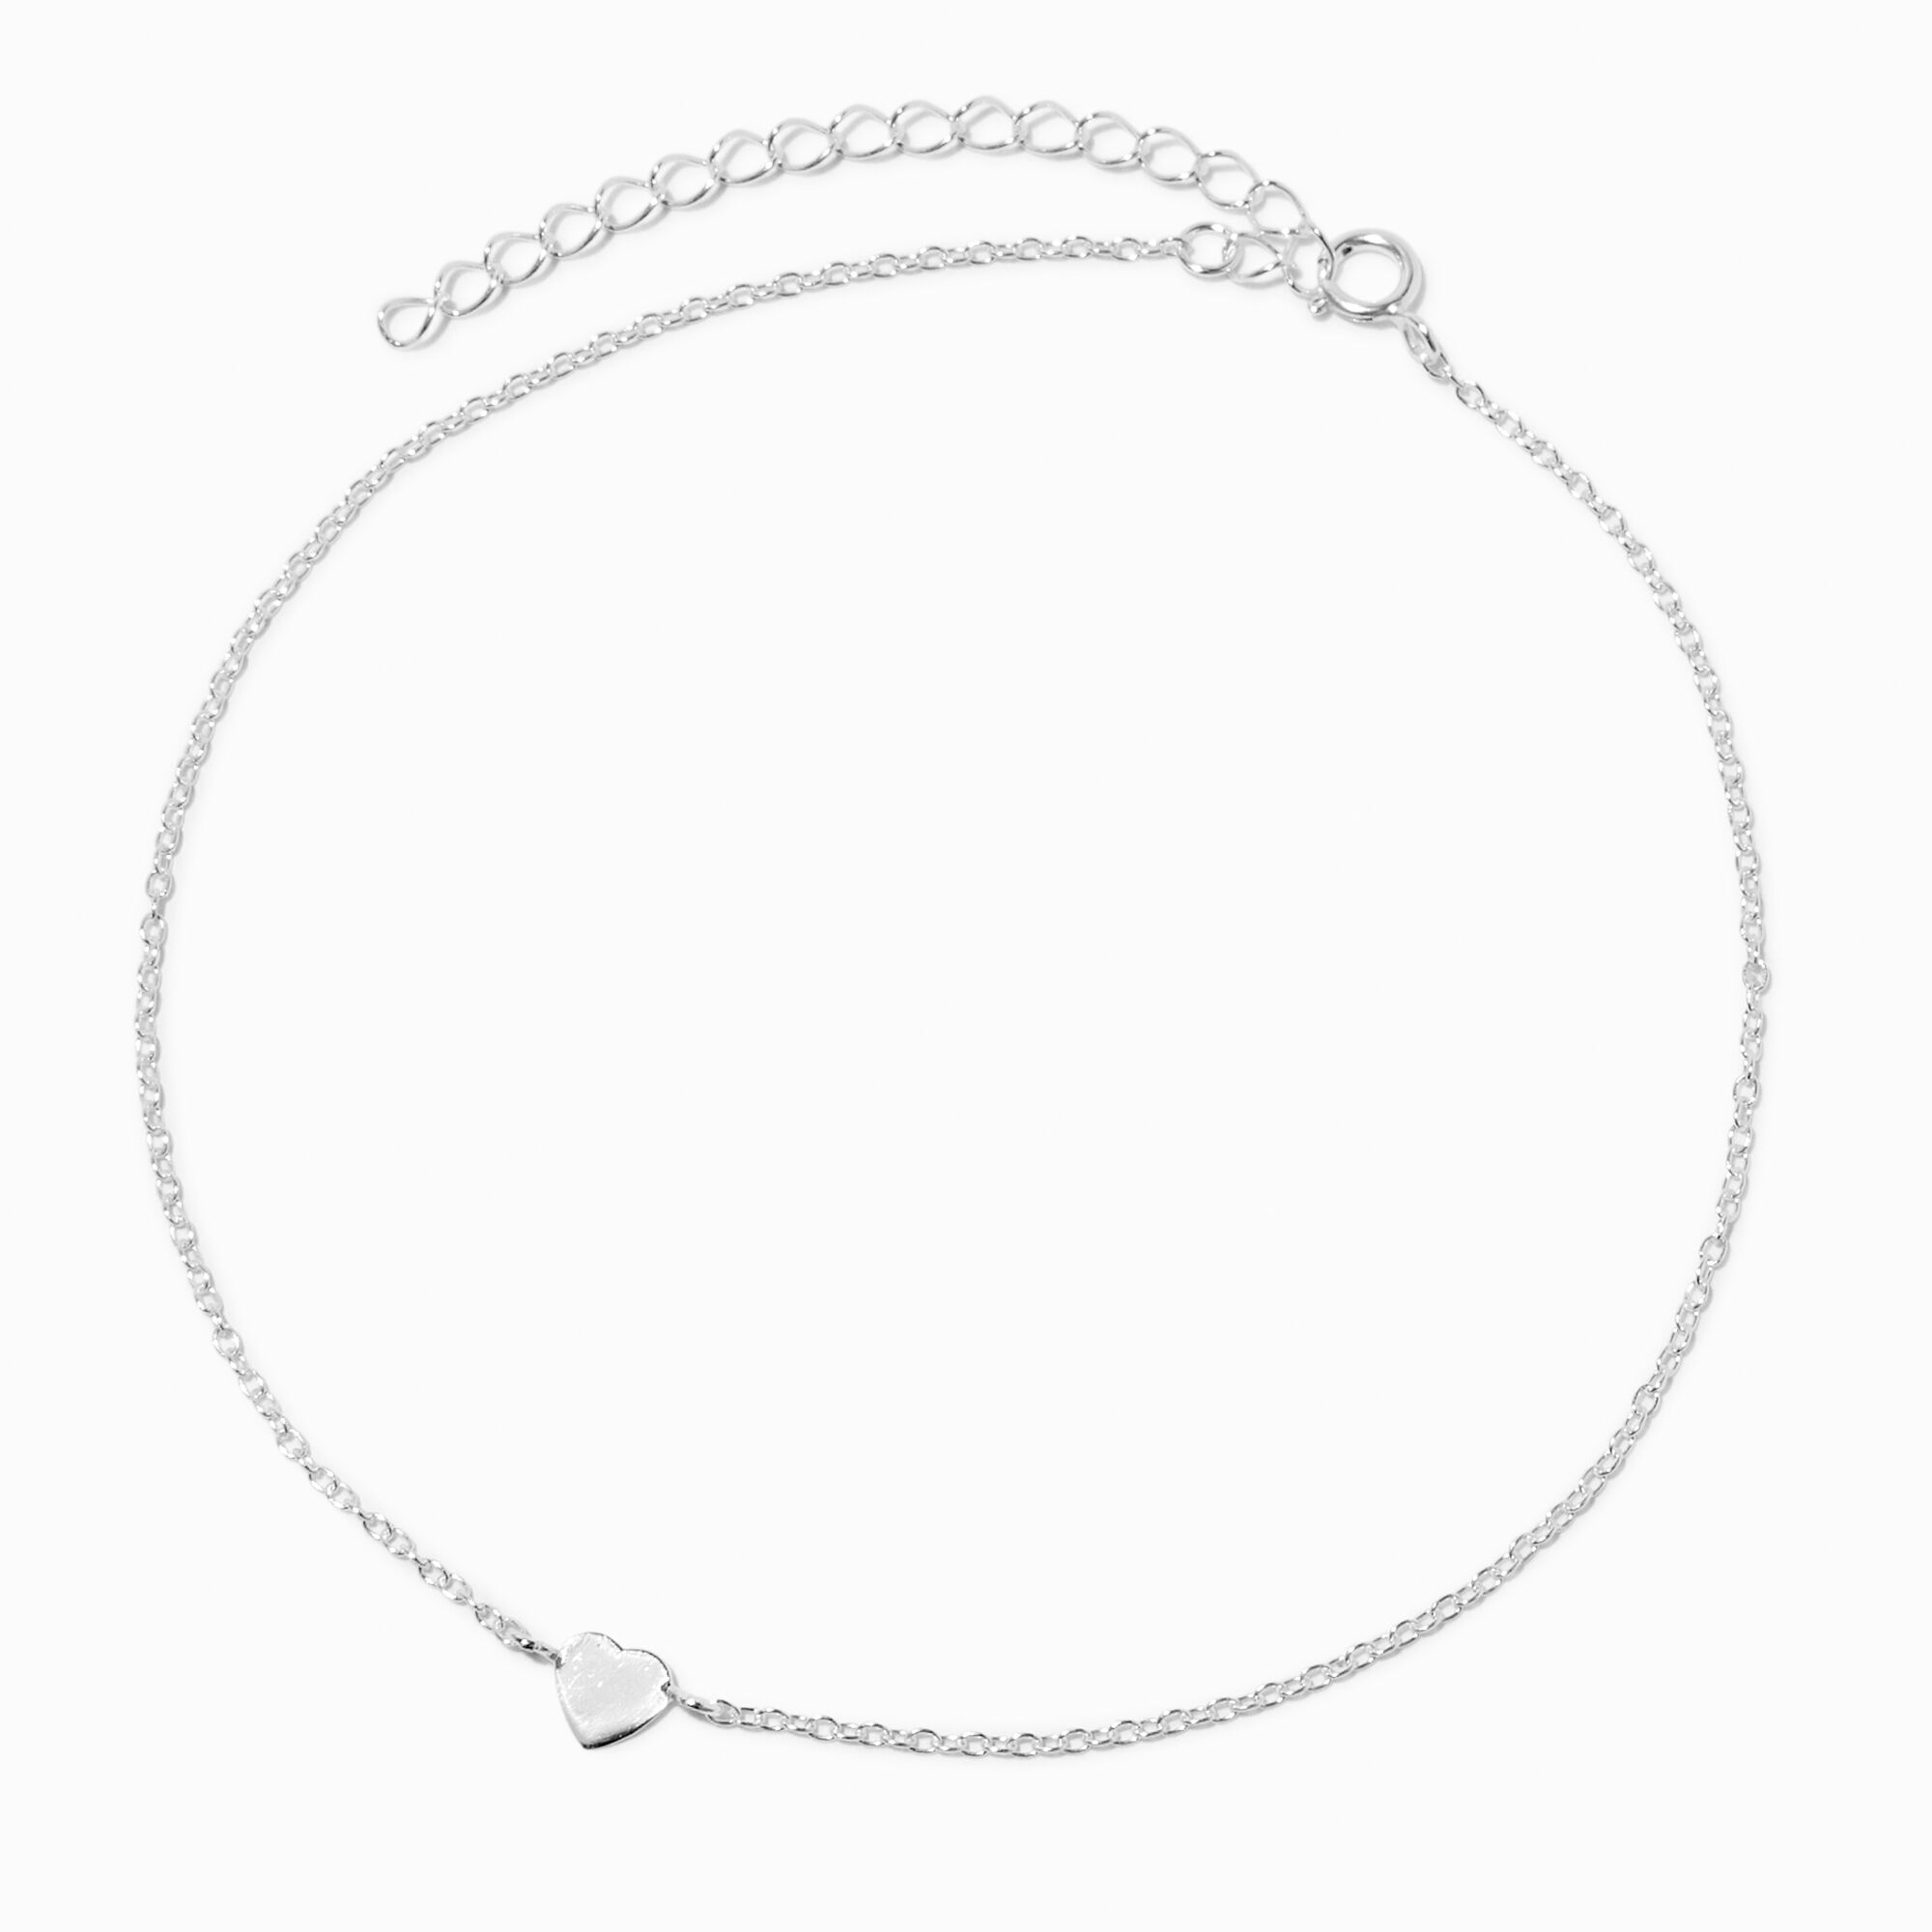 View C Luxe By Claires Heart Anklet Silver information